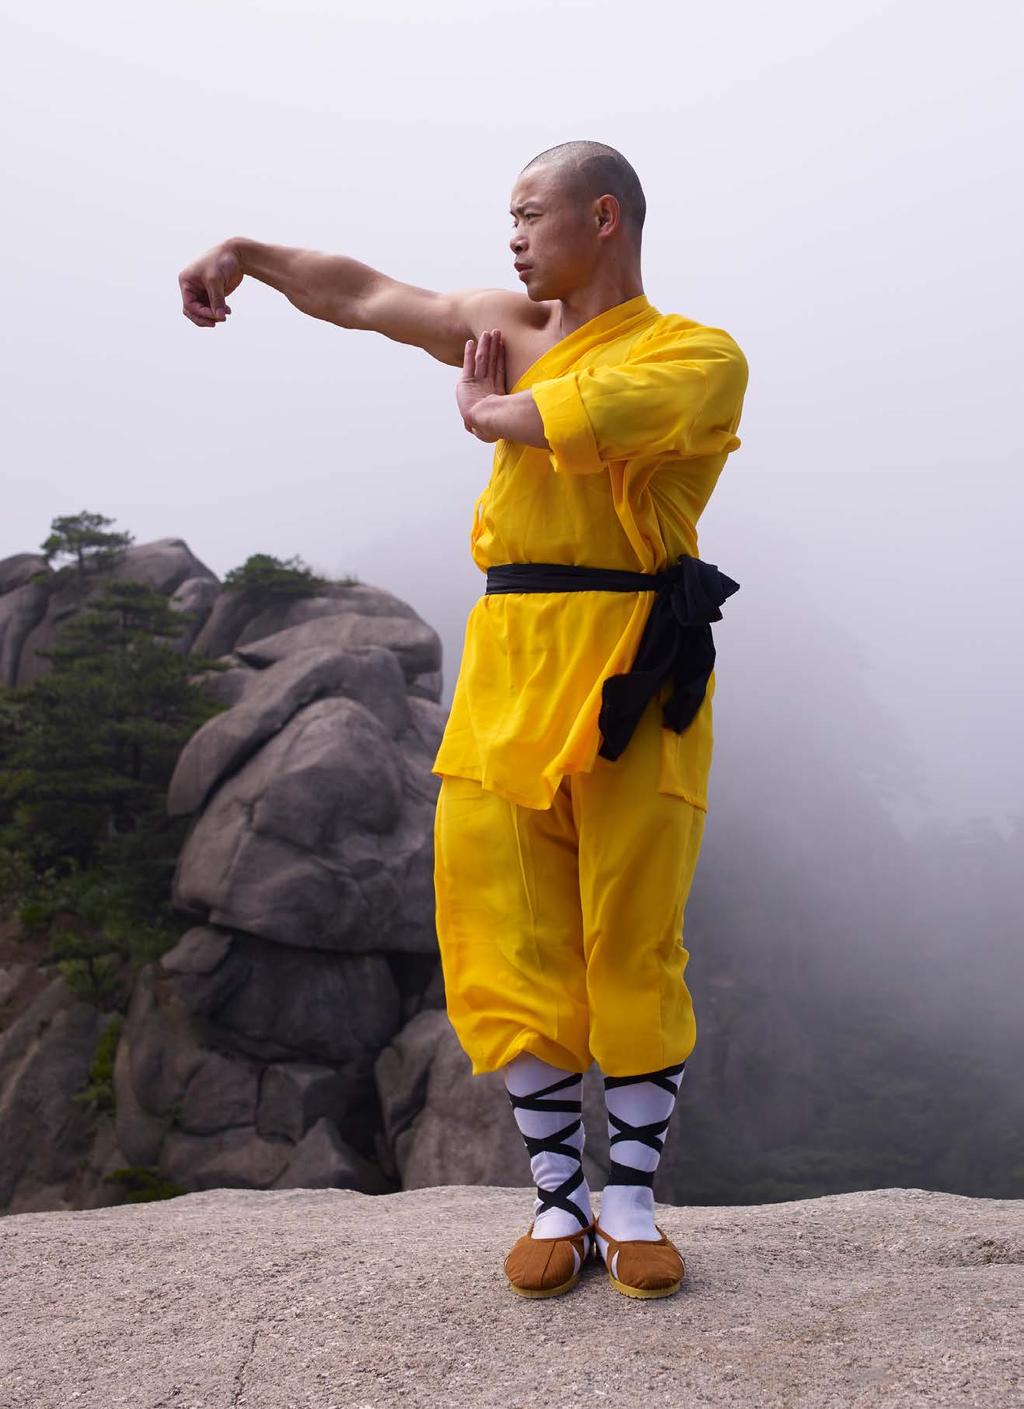 Kung Fu is your Yang training, which pushes your limits and raises your awareness of your unlimited capabilities.